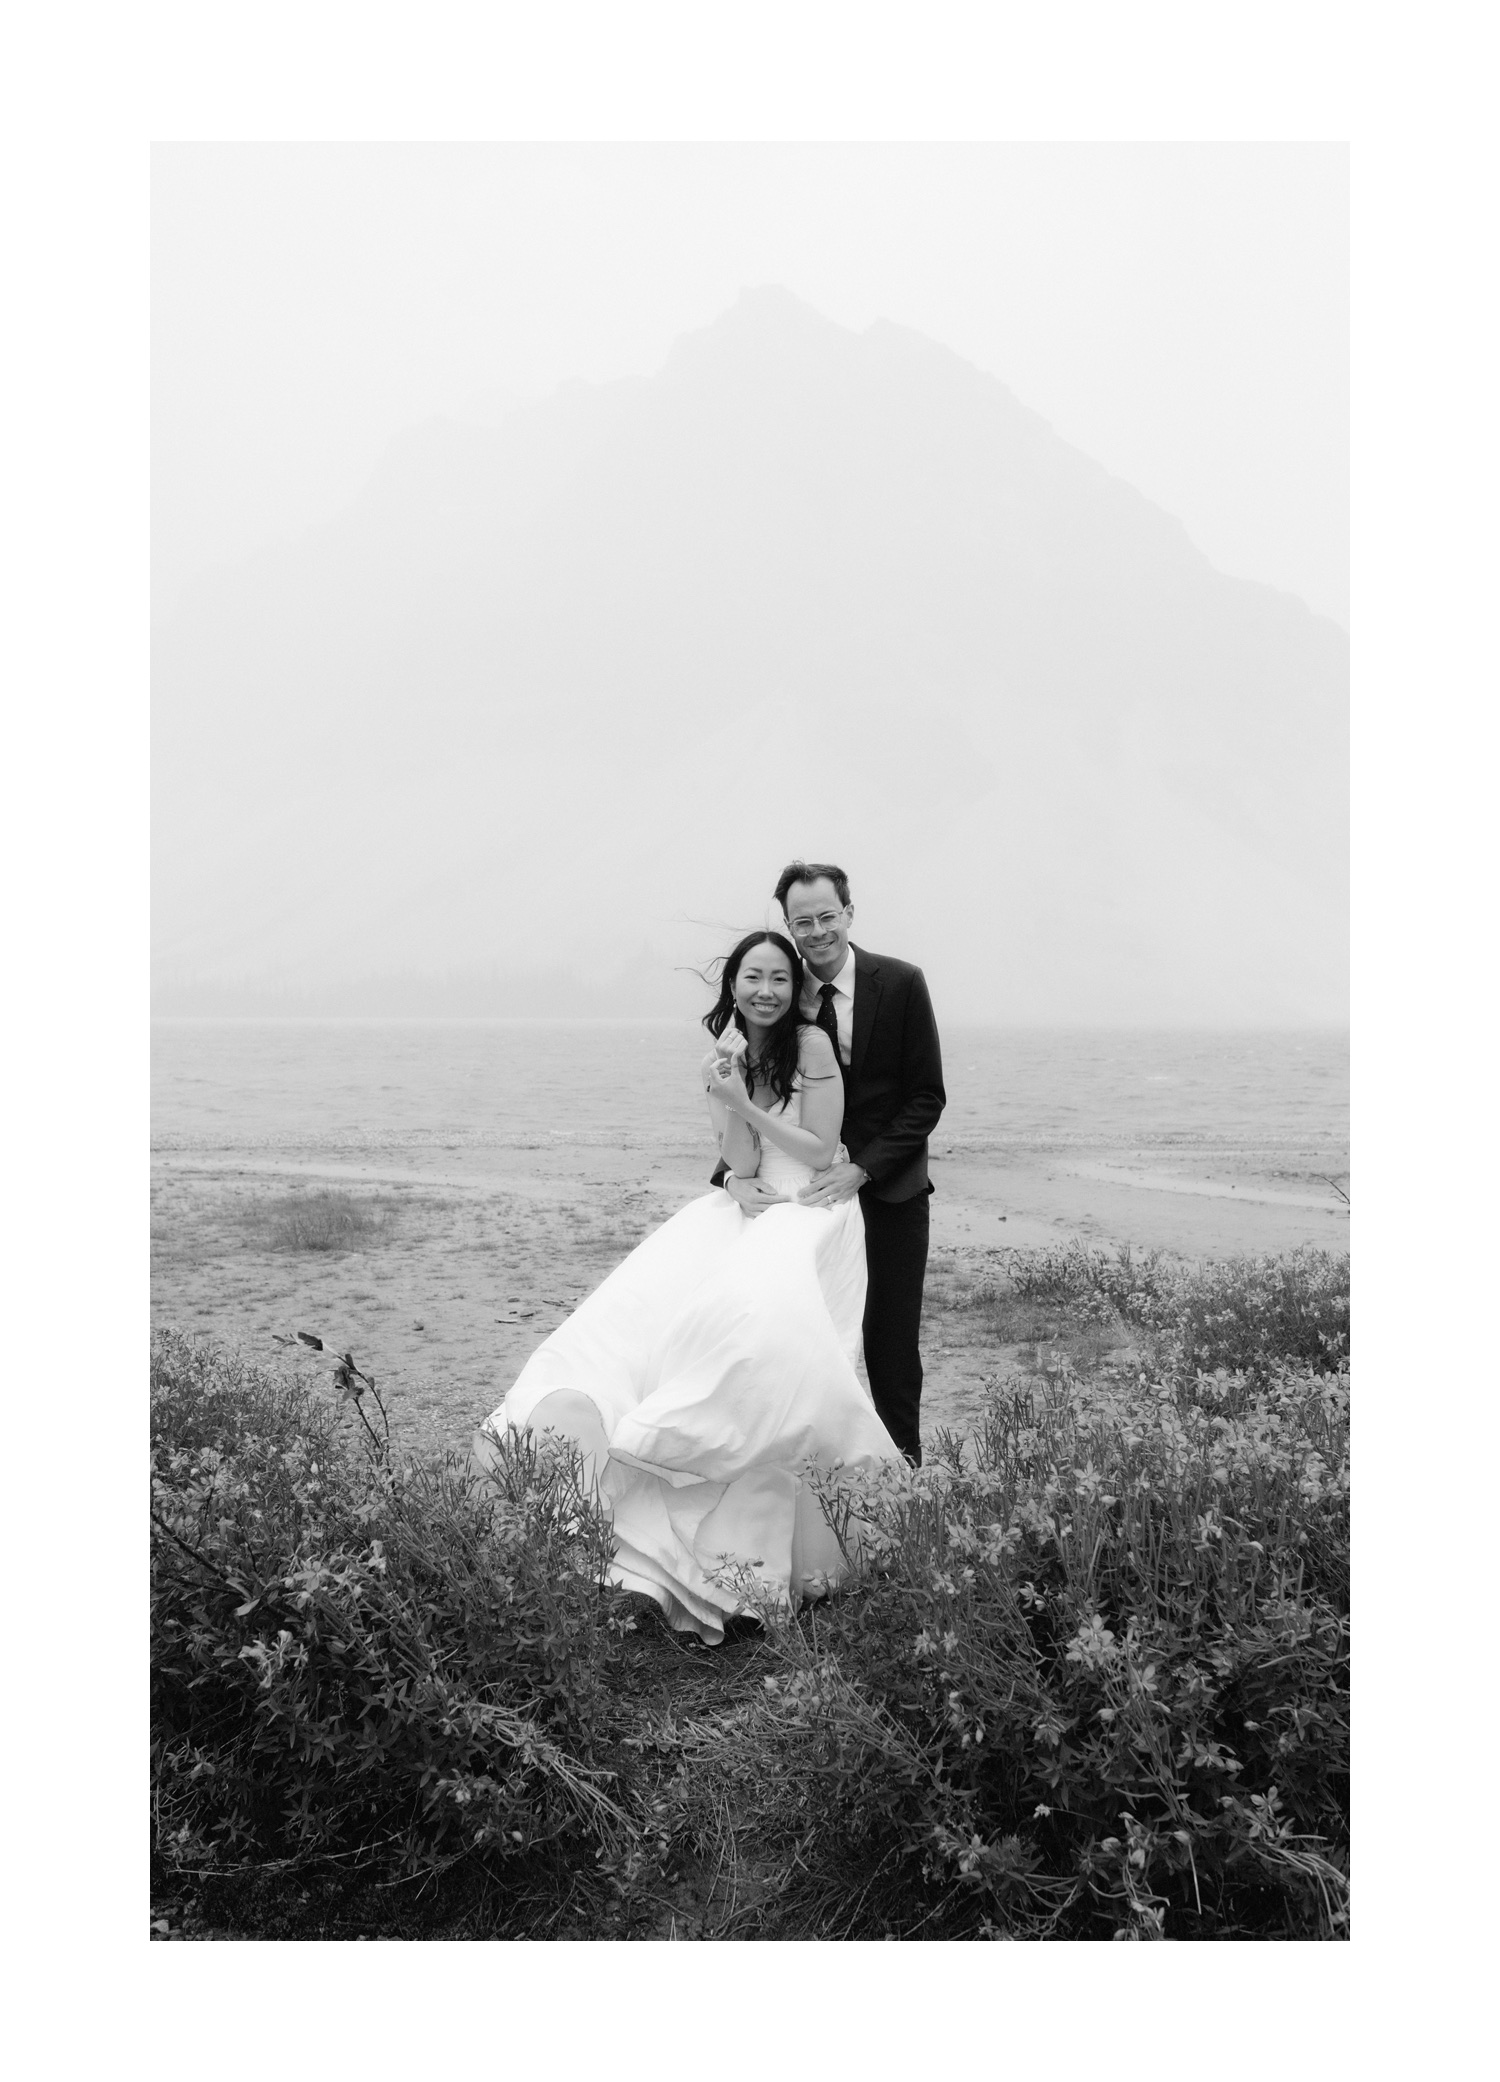 Creative and timeless black and white wedding portraiture in Banff